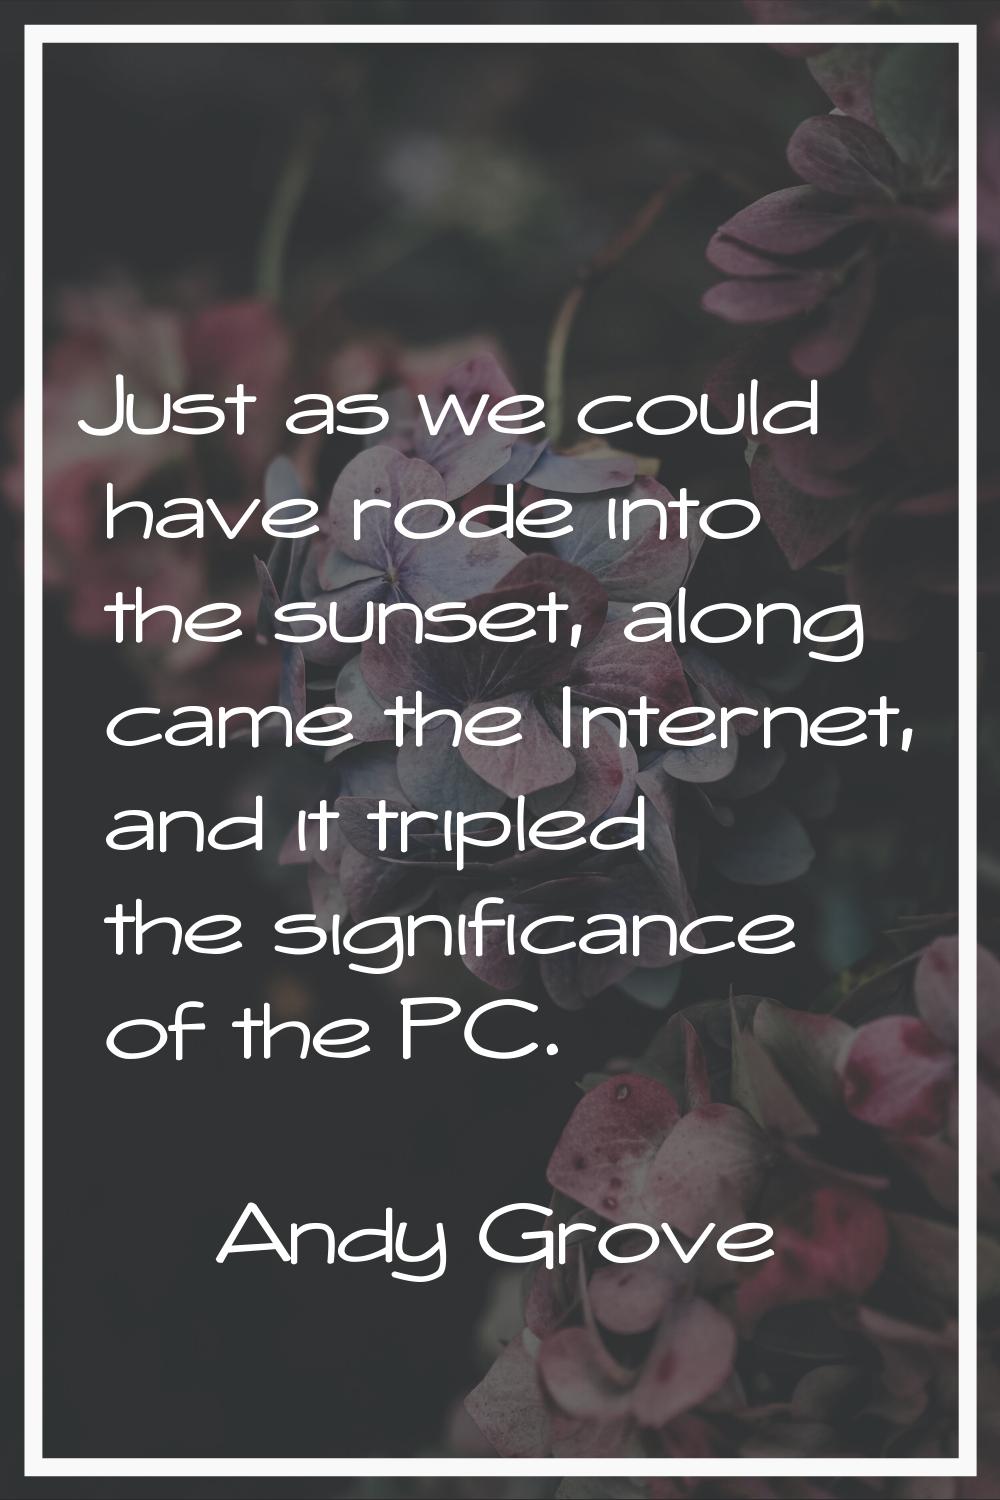 Just as we could have rode into the sunset, along came the Internet, and it tripled the significanc